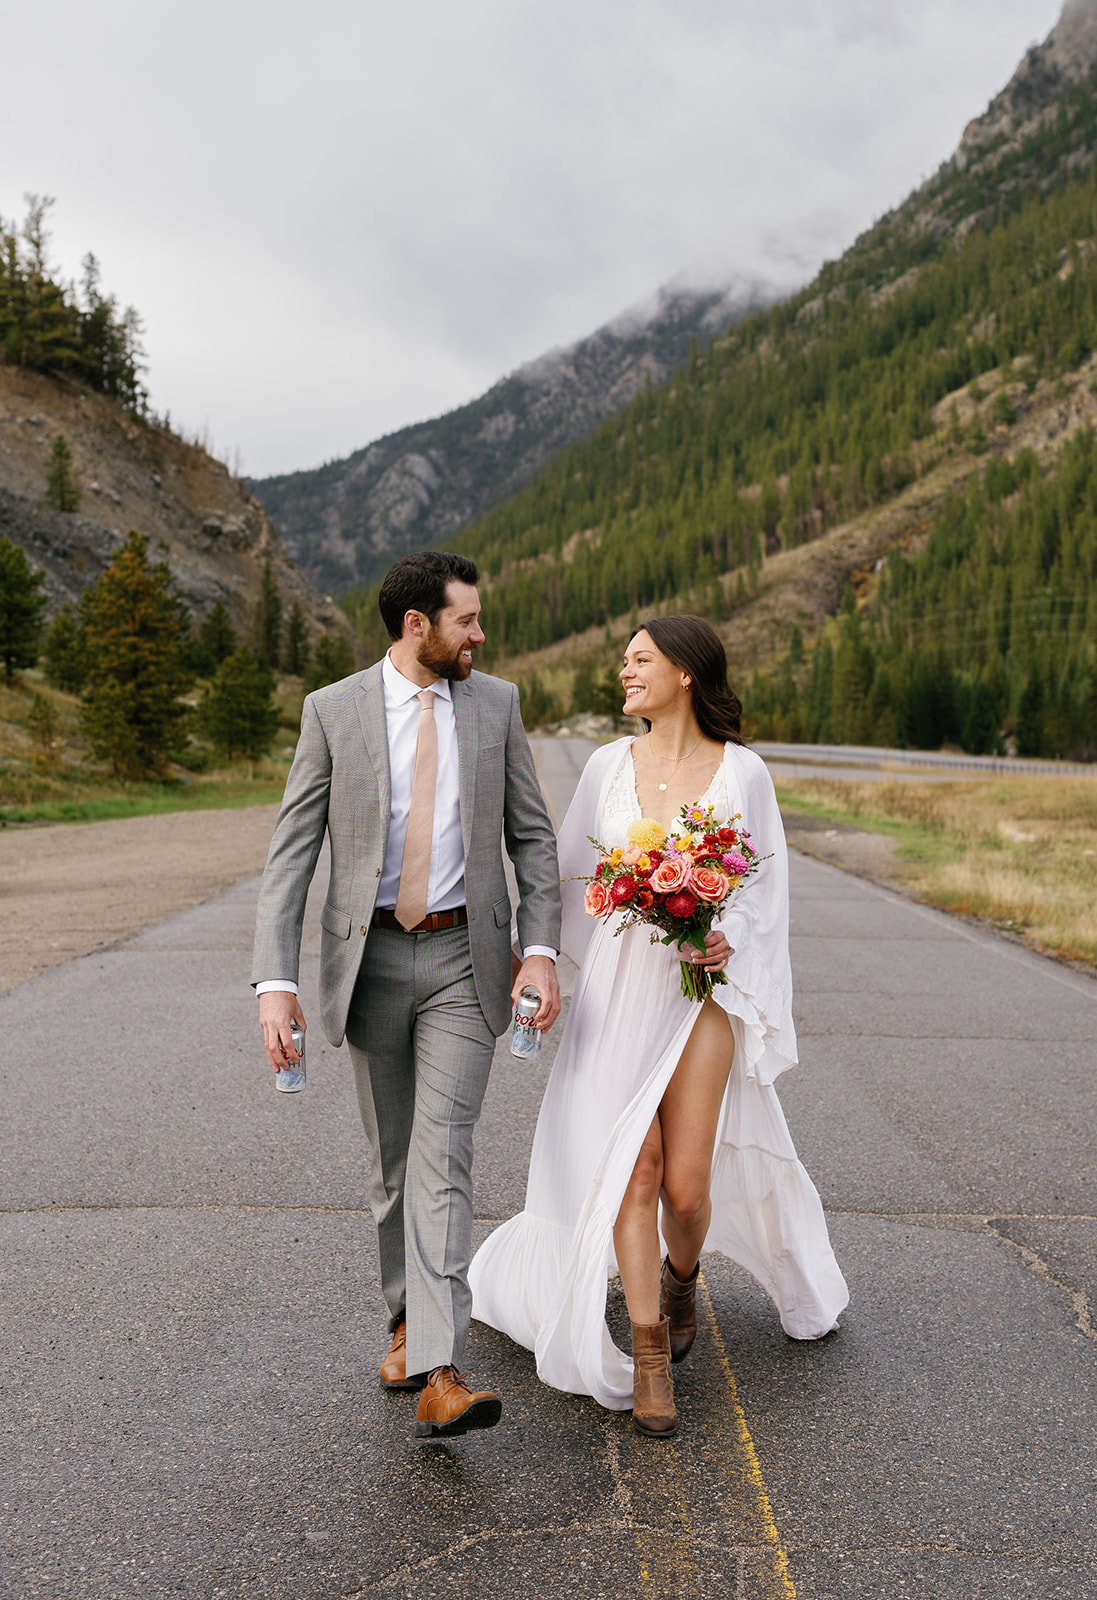 Newlyweds walk down a road in the mountains holding beer and flowers Keystone Resort Wedding